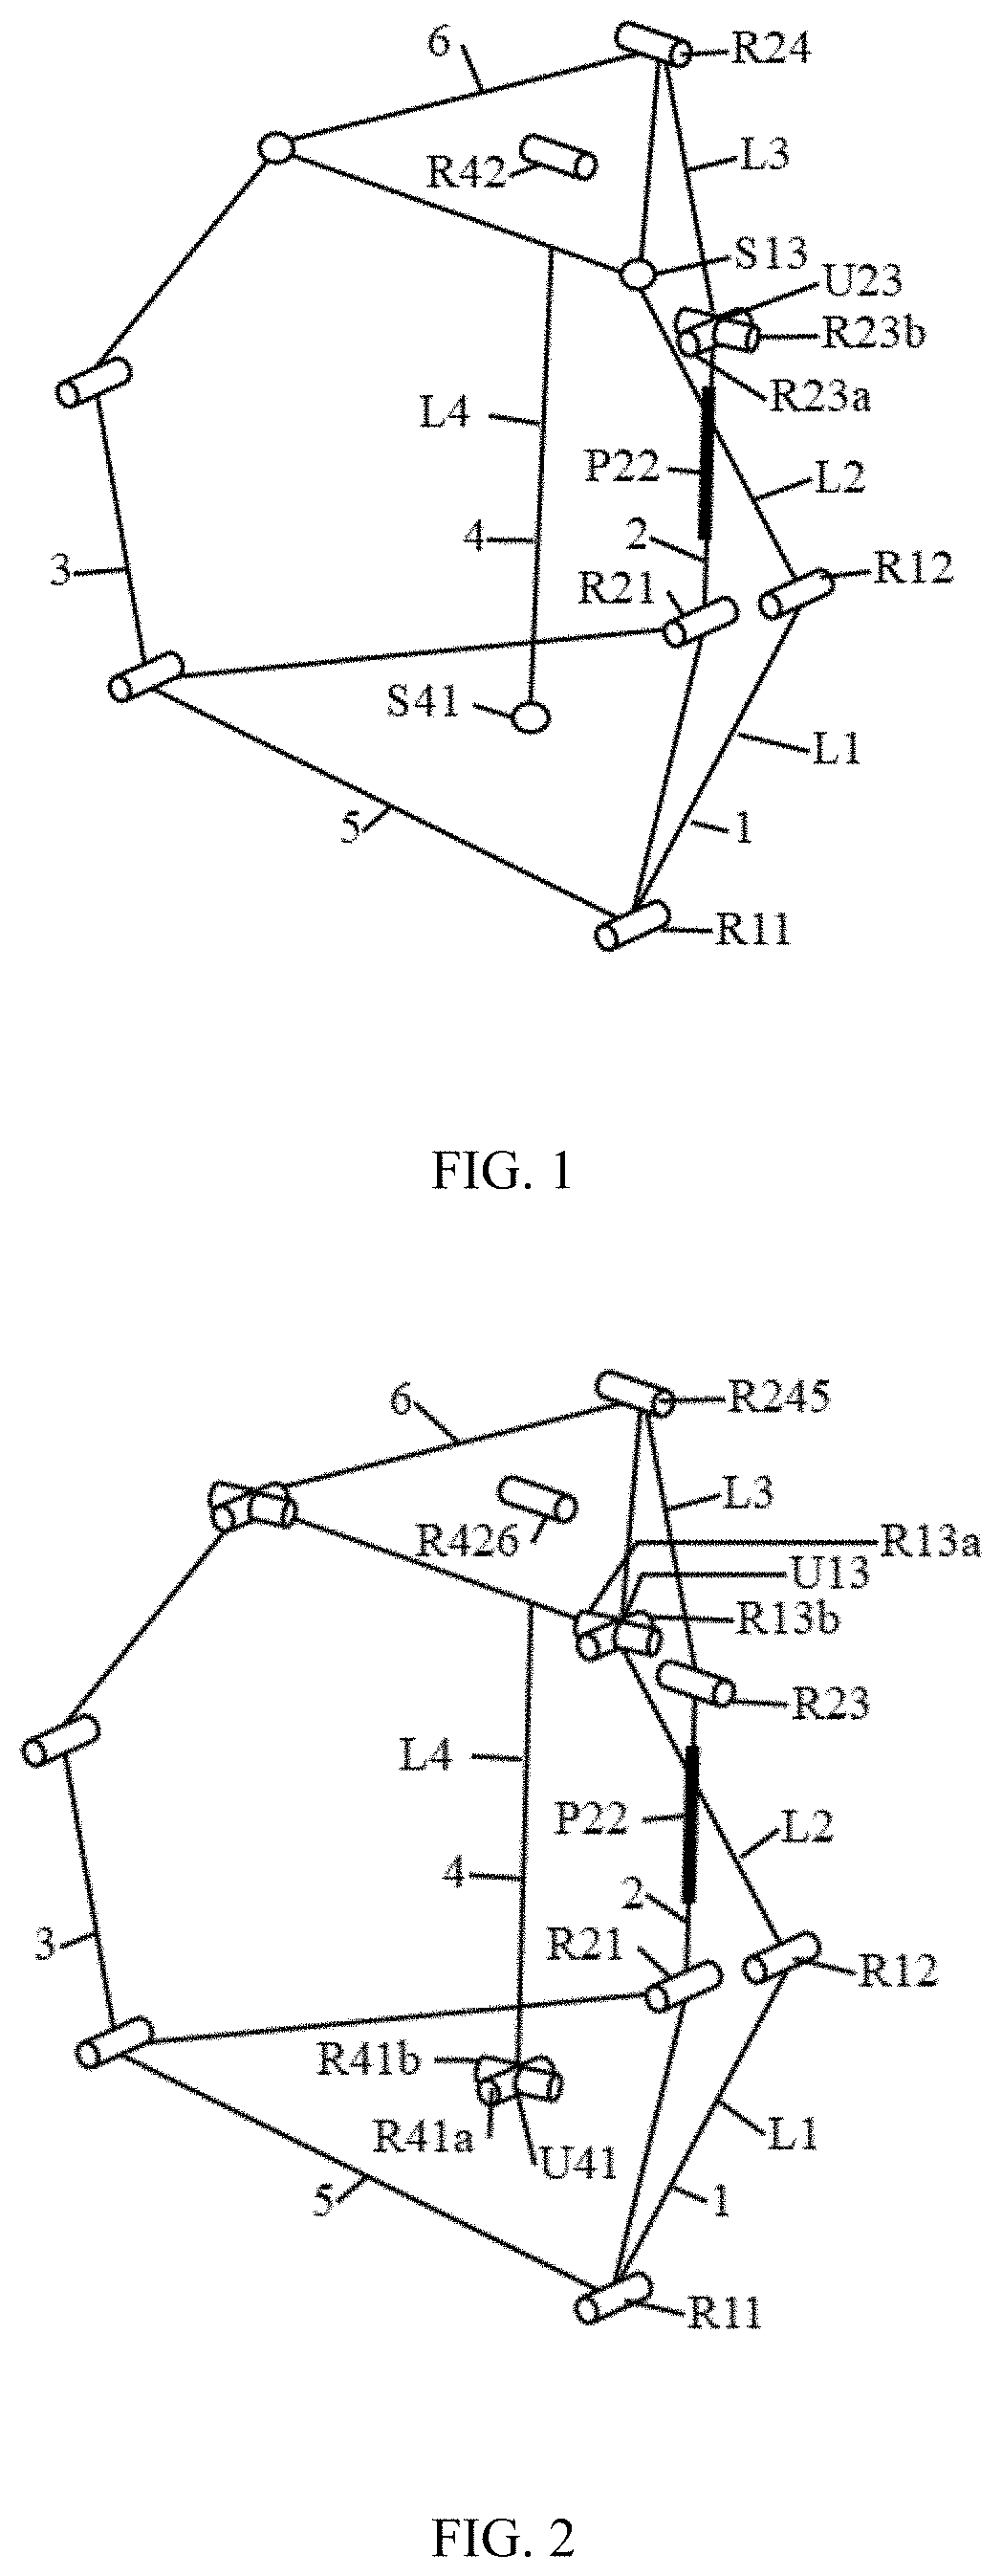 Class of Over-Constrained Two-Rotation Parallel Mechanism with Same Kinematics